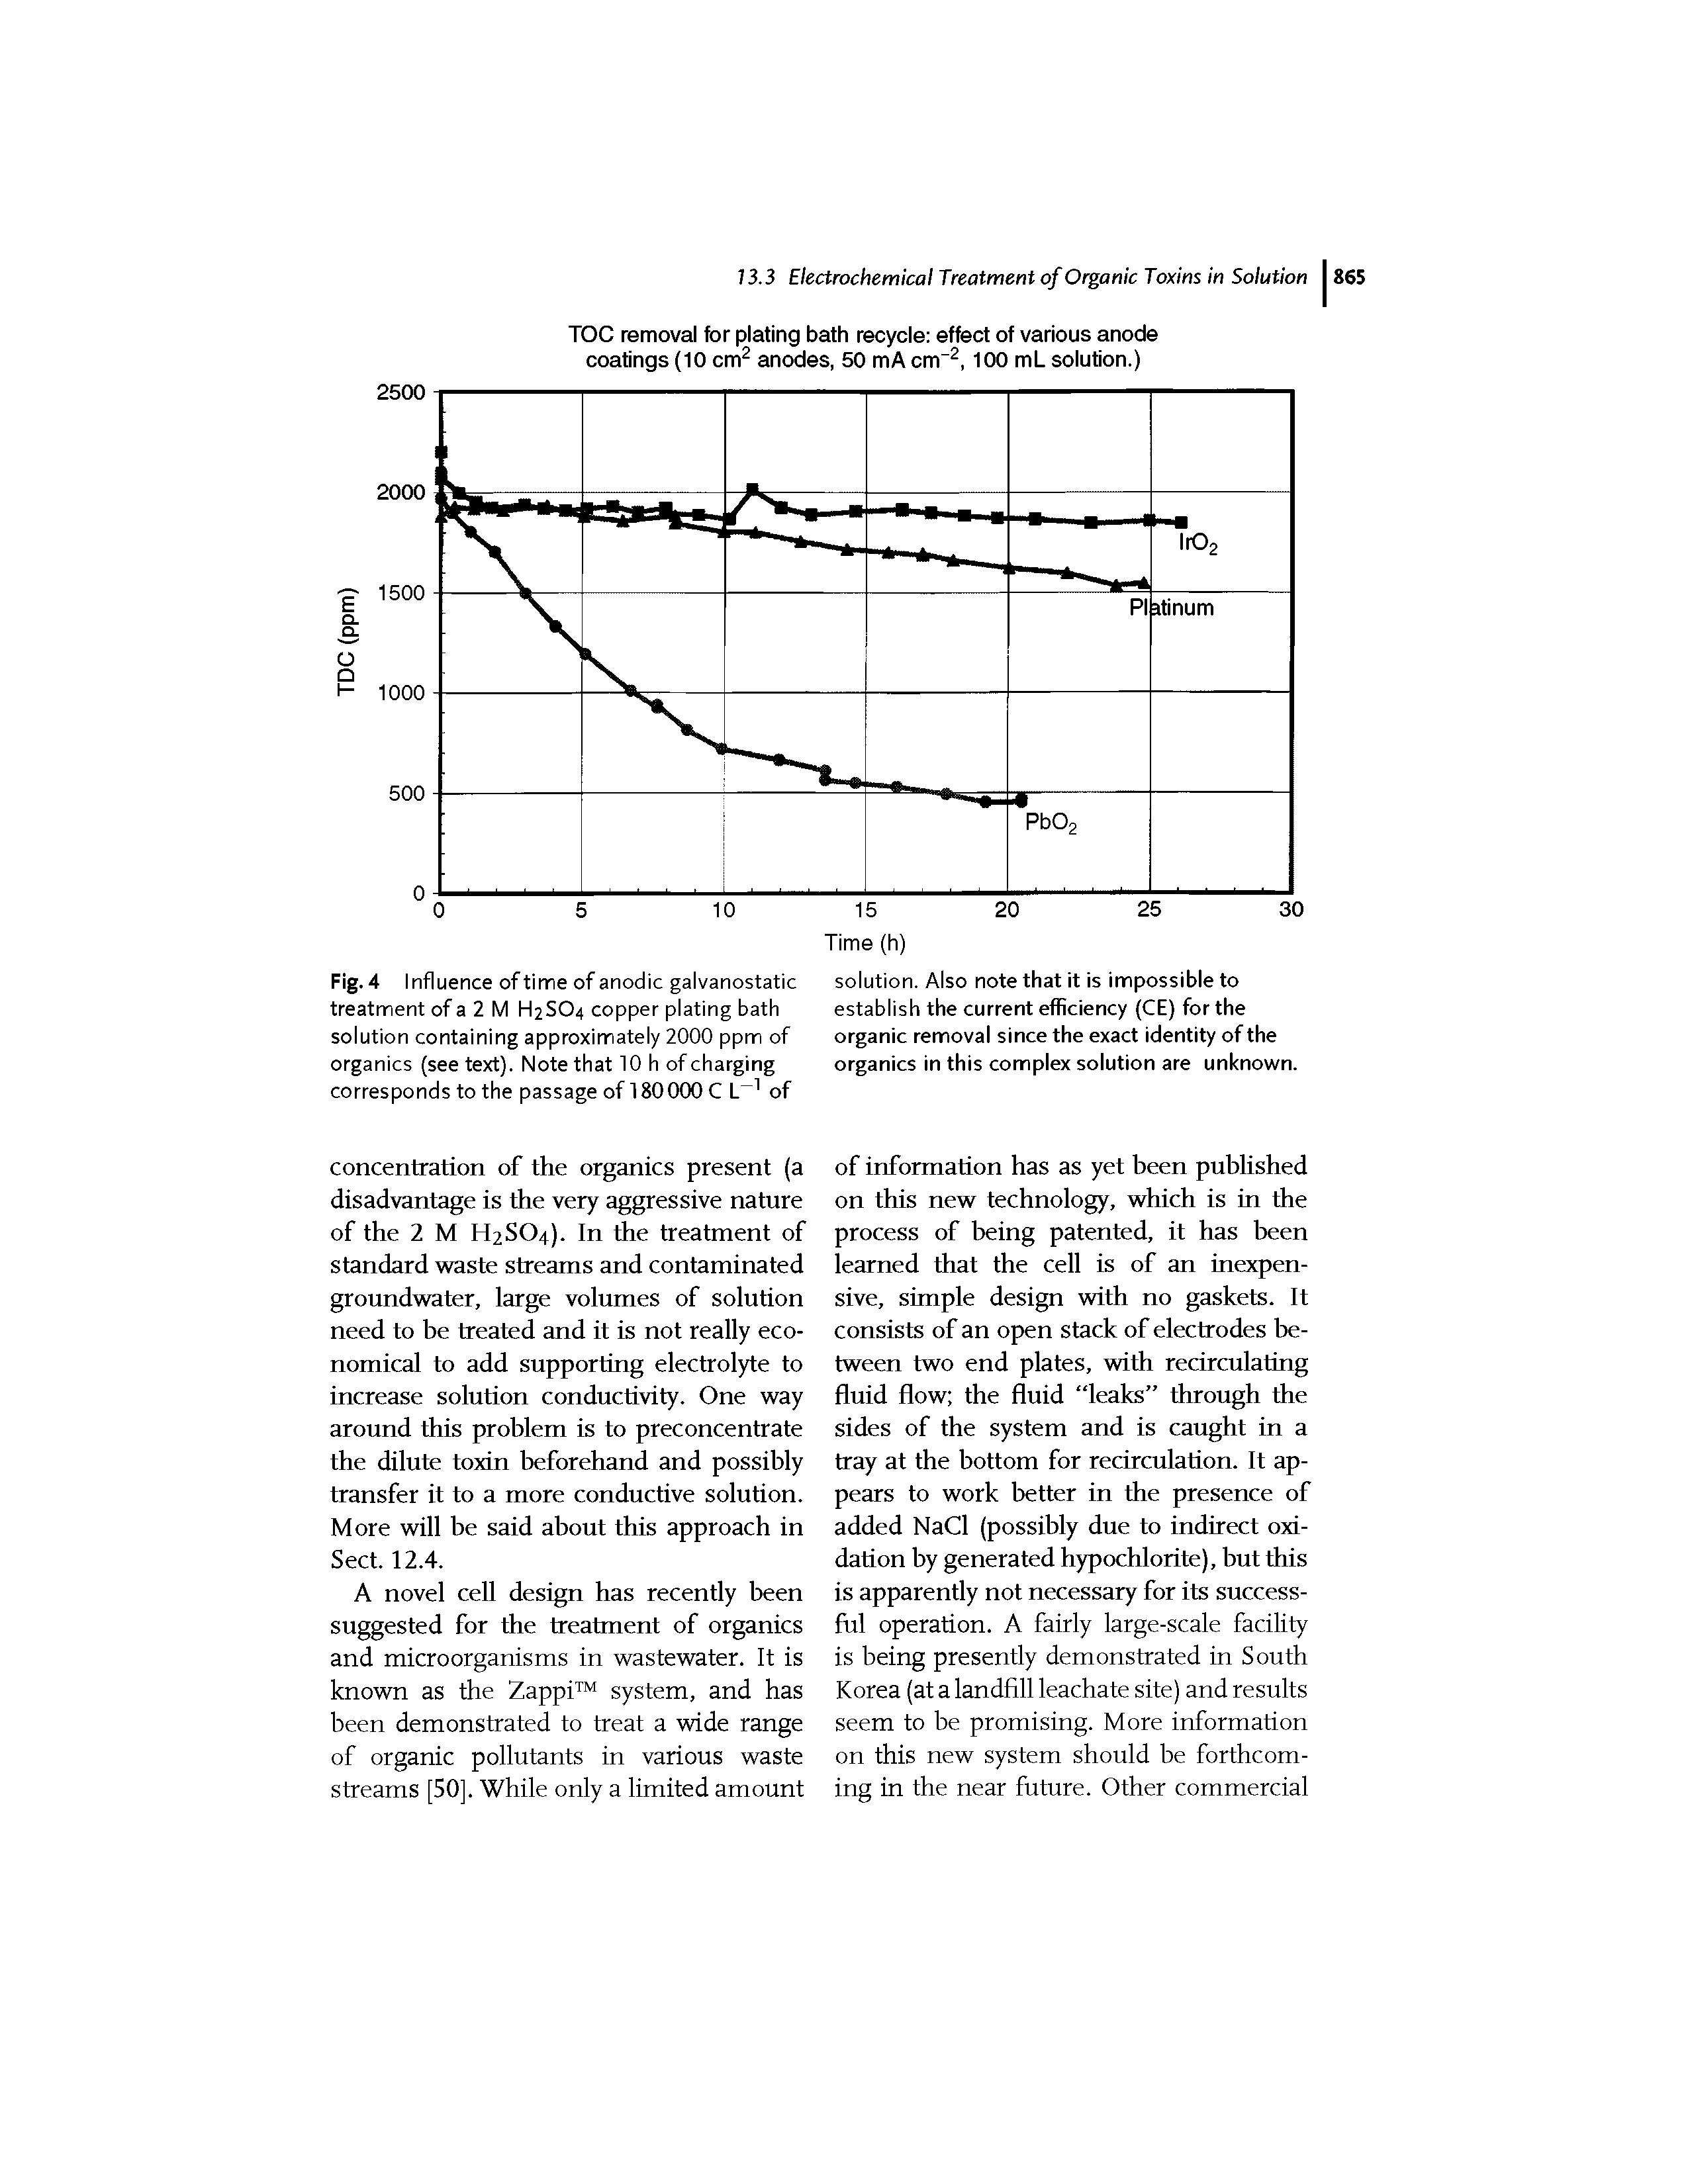 Fig. 4 Influence of time of anodic galvanostatic treatment of a 2 M H2SO4 copper plating bath solution containing approximately 2000 ppm of organics (see text). Note that 10 h of charging corresponds to the passage of 180000 C L 1 of...